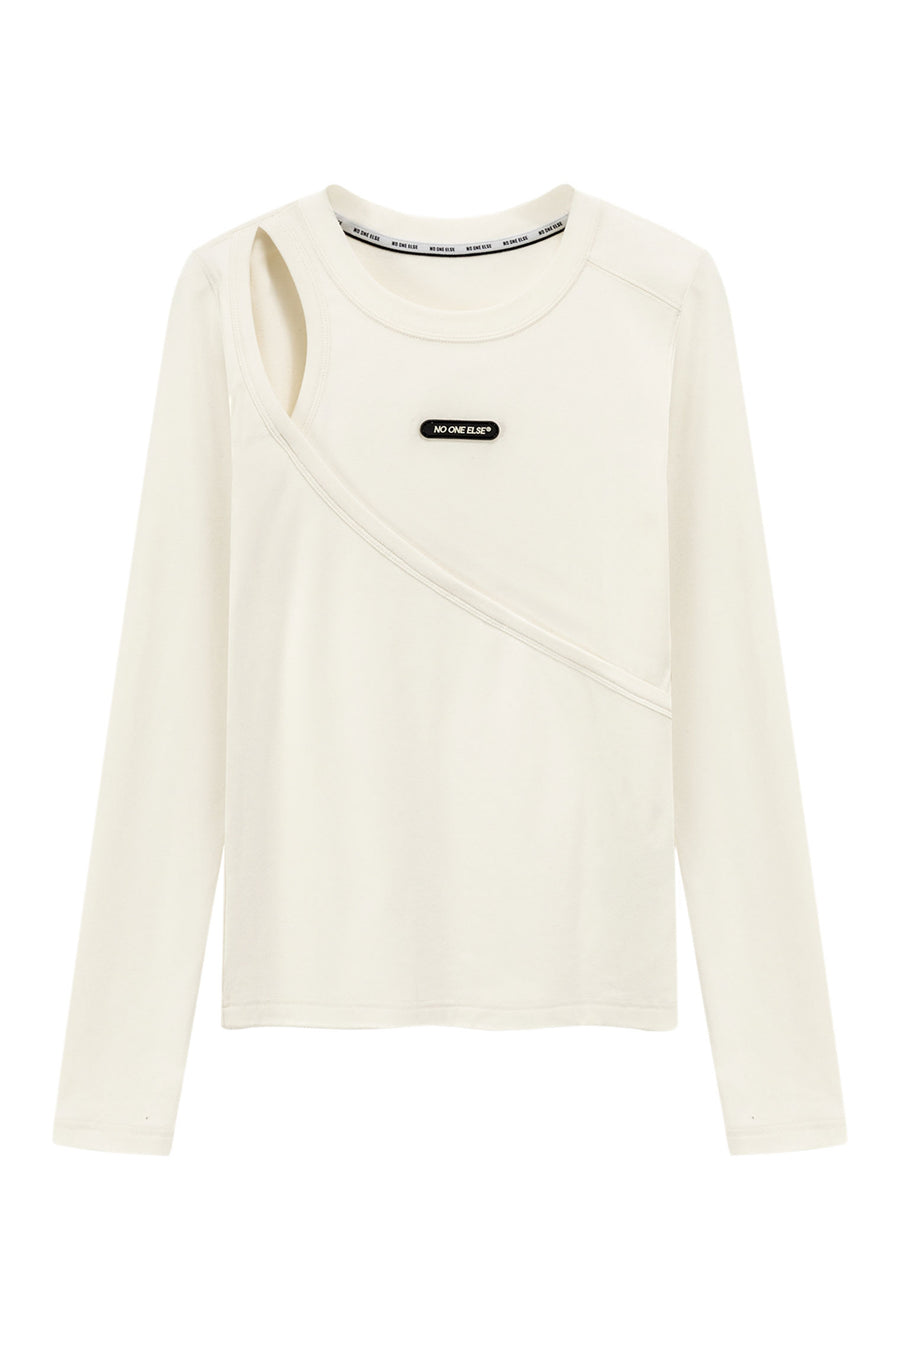 Layered Open Shoulder Simple T-Shirt